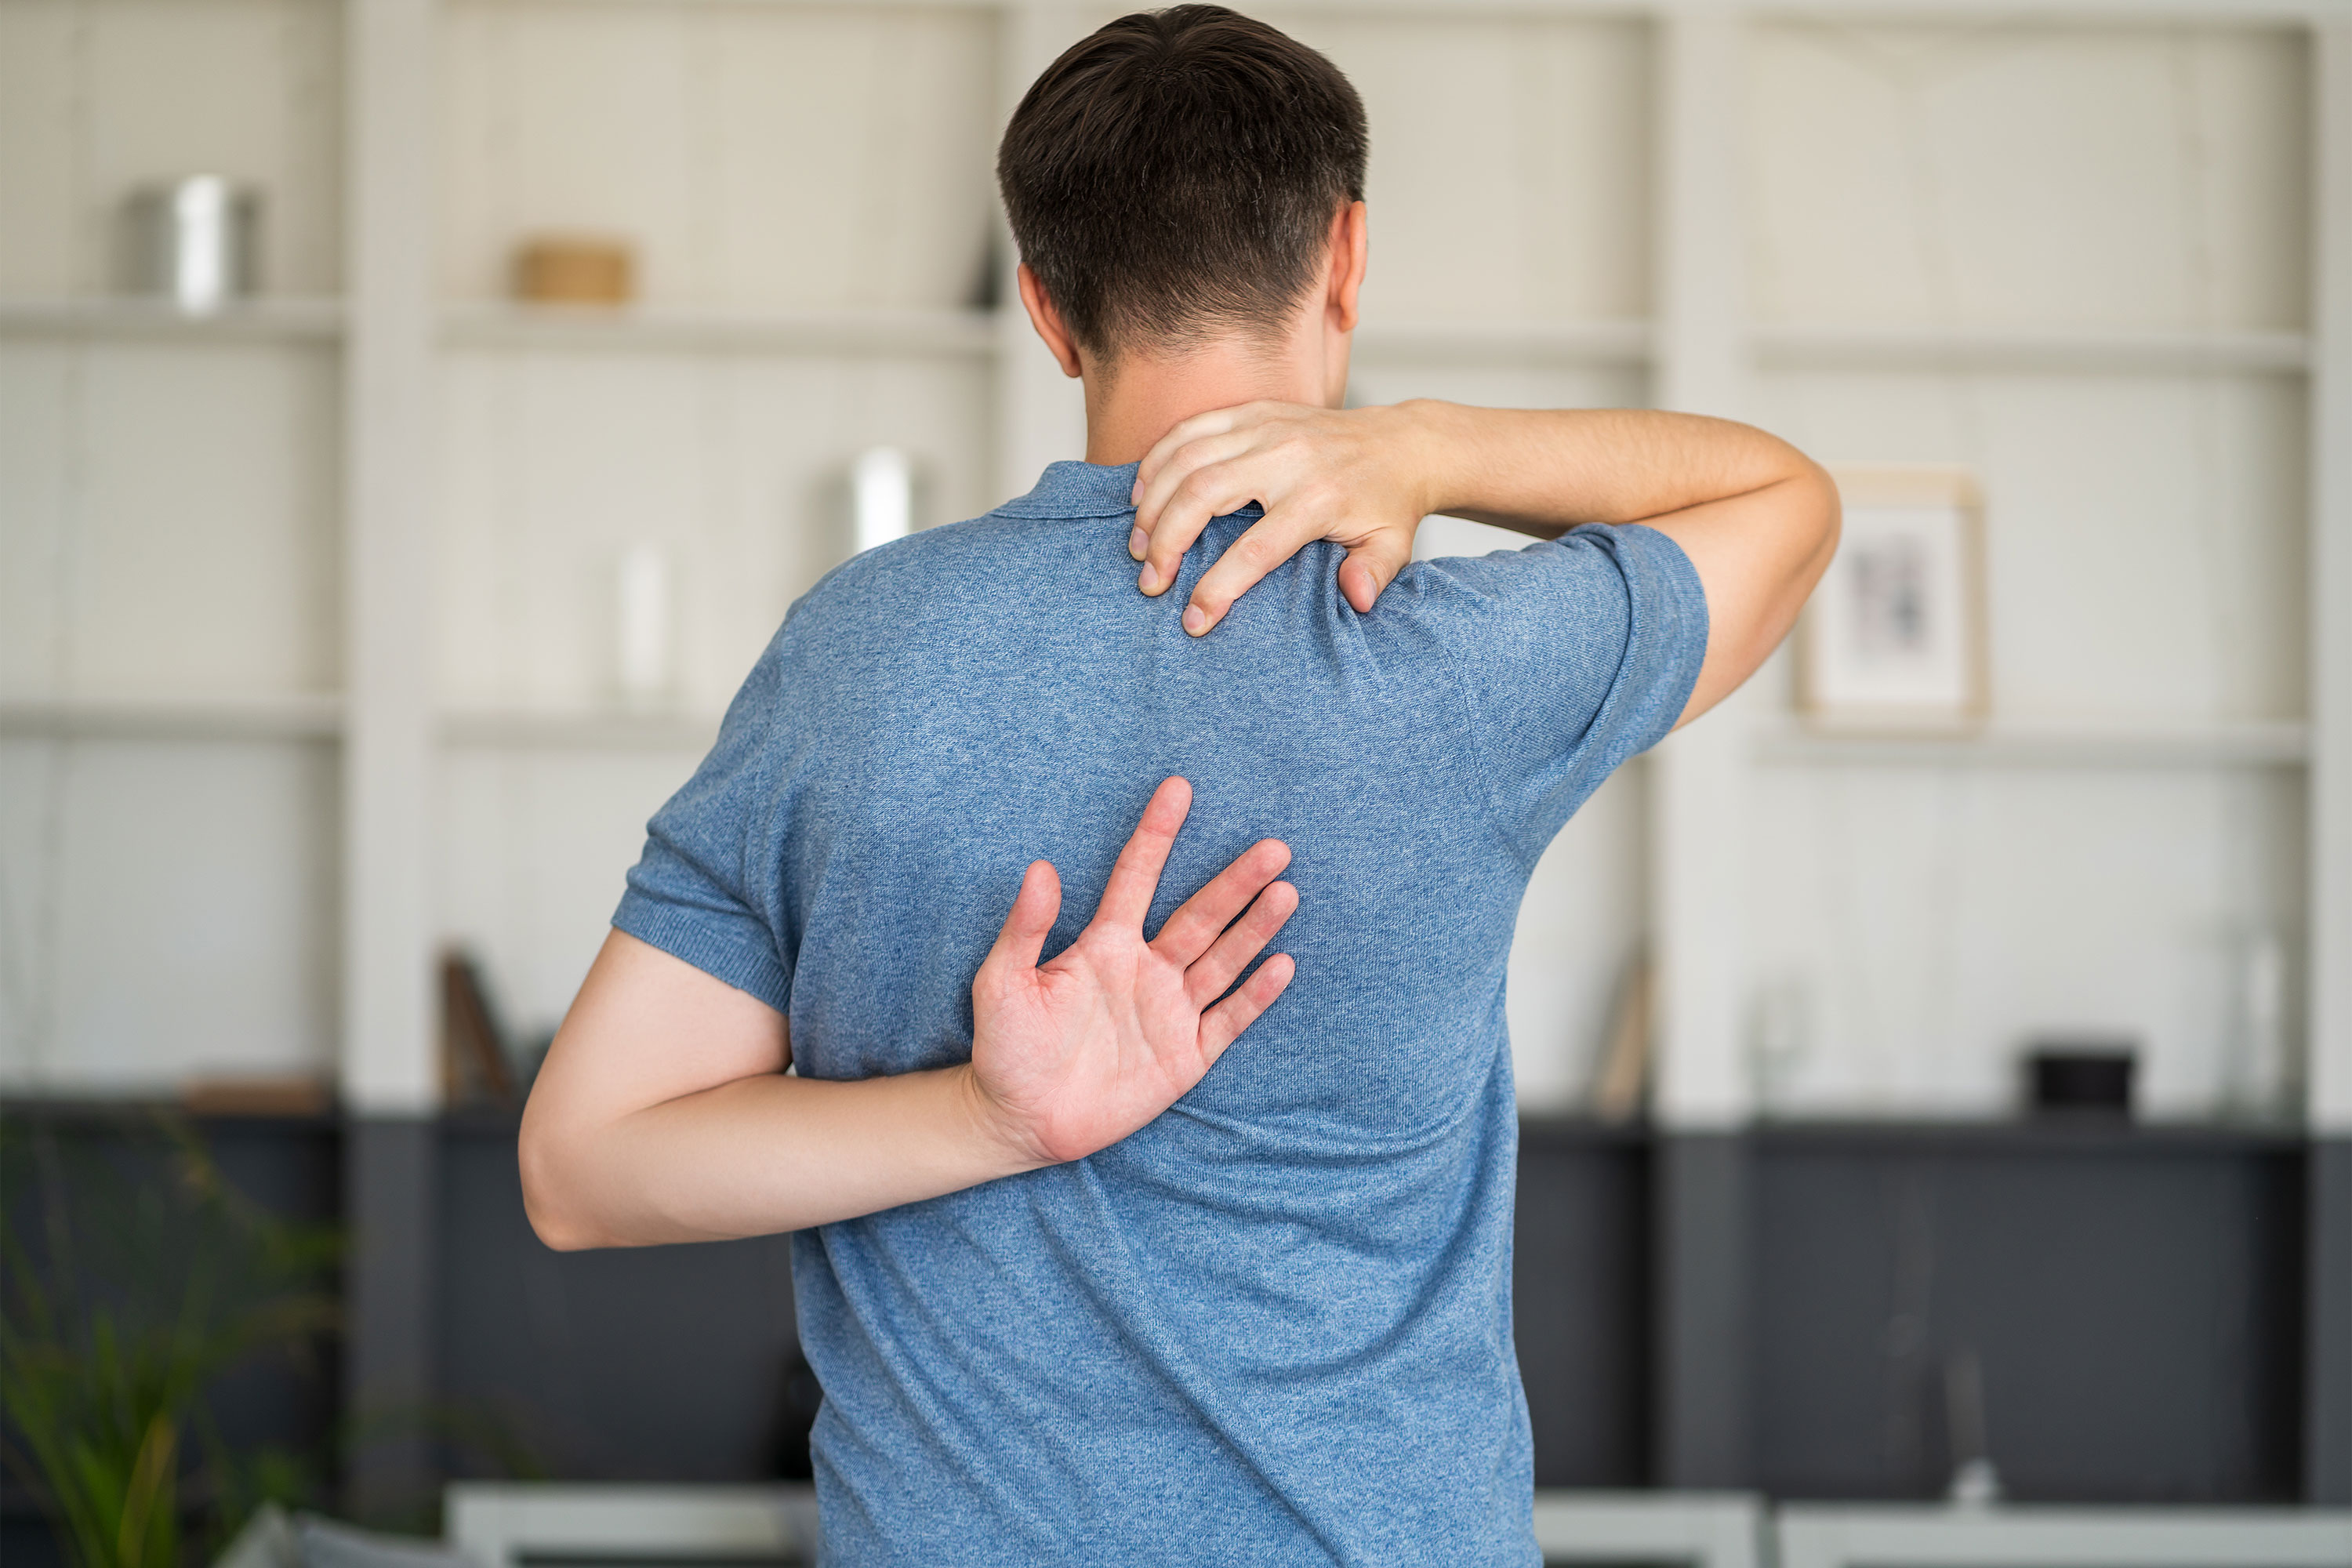 Why Do I Wake Up With Upper Back Pain Between Shoulder Blades?